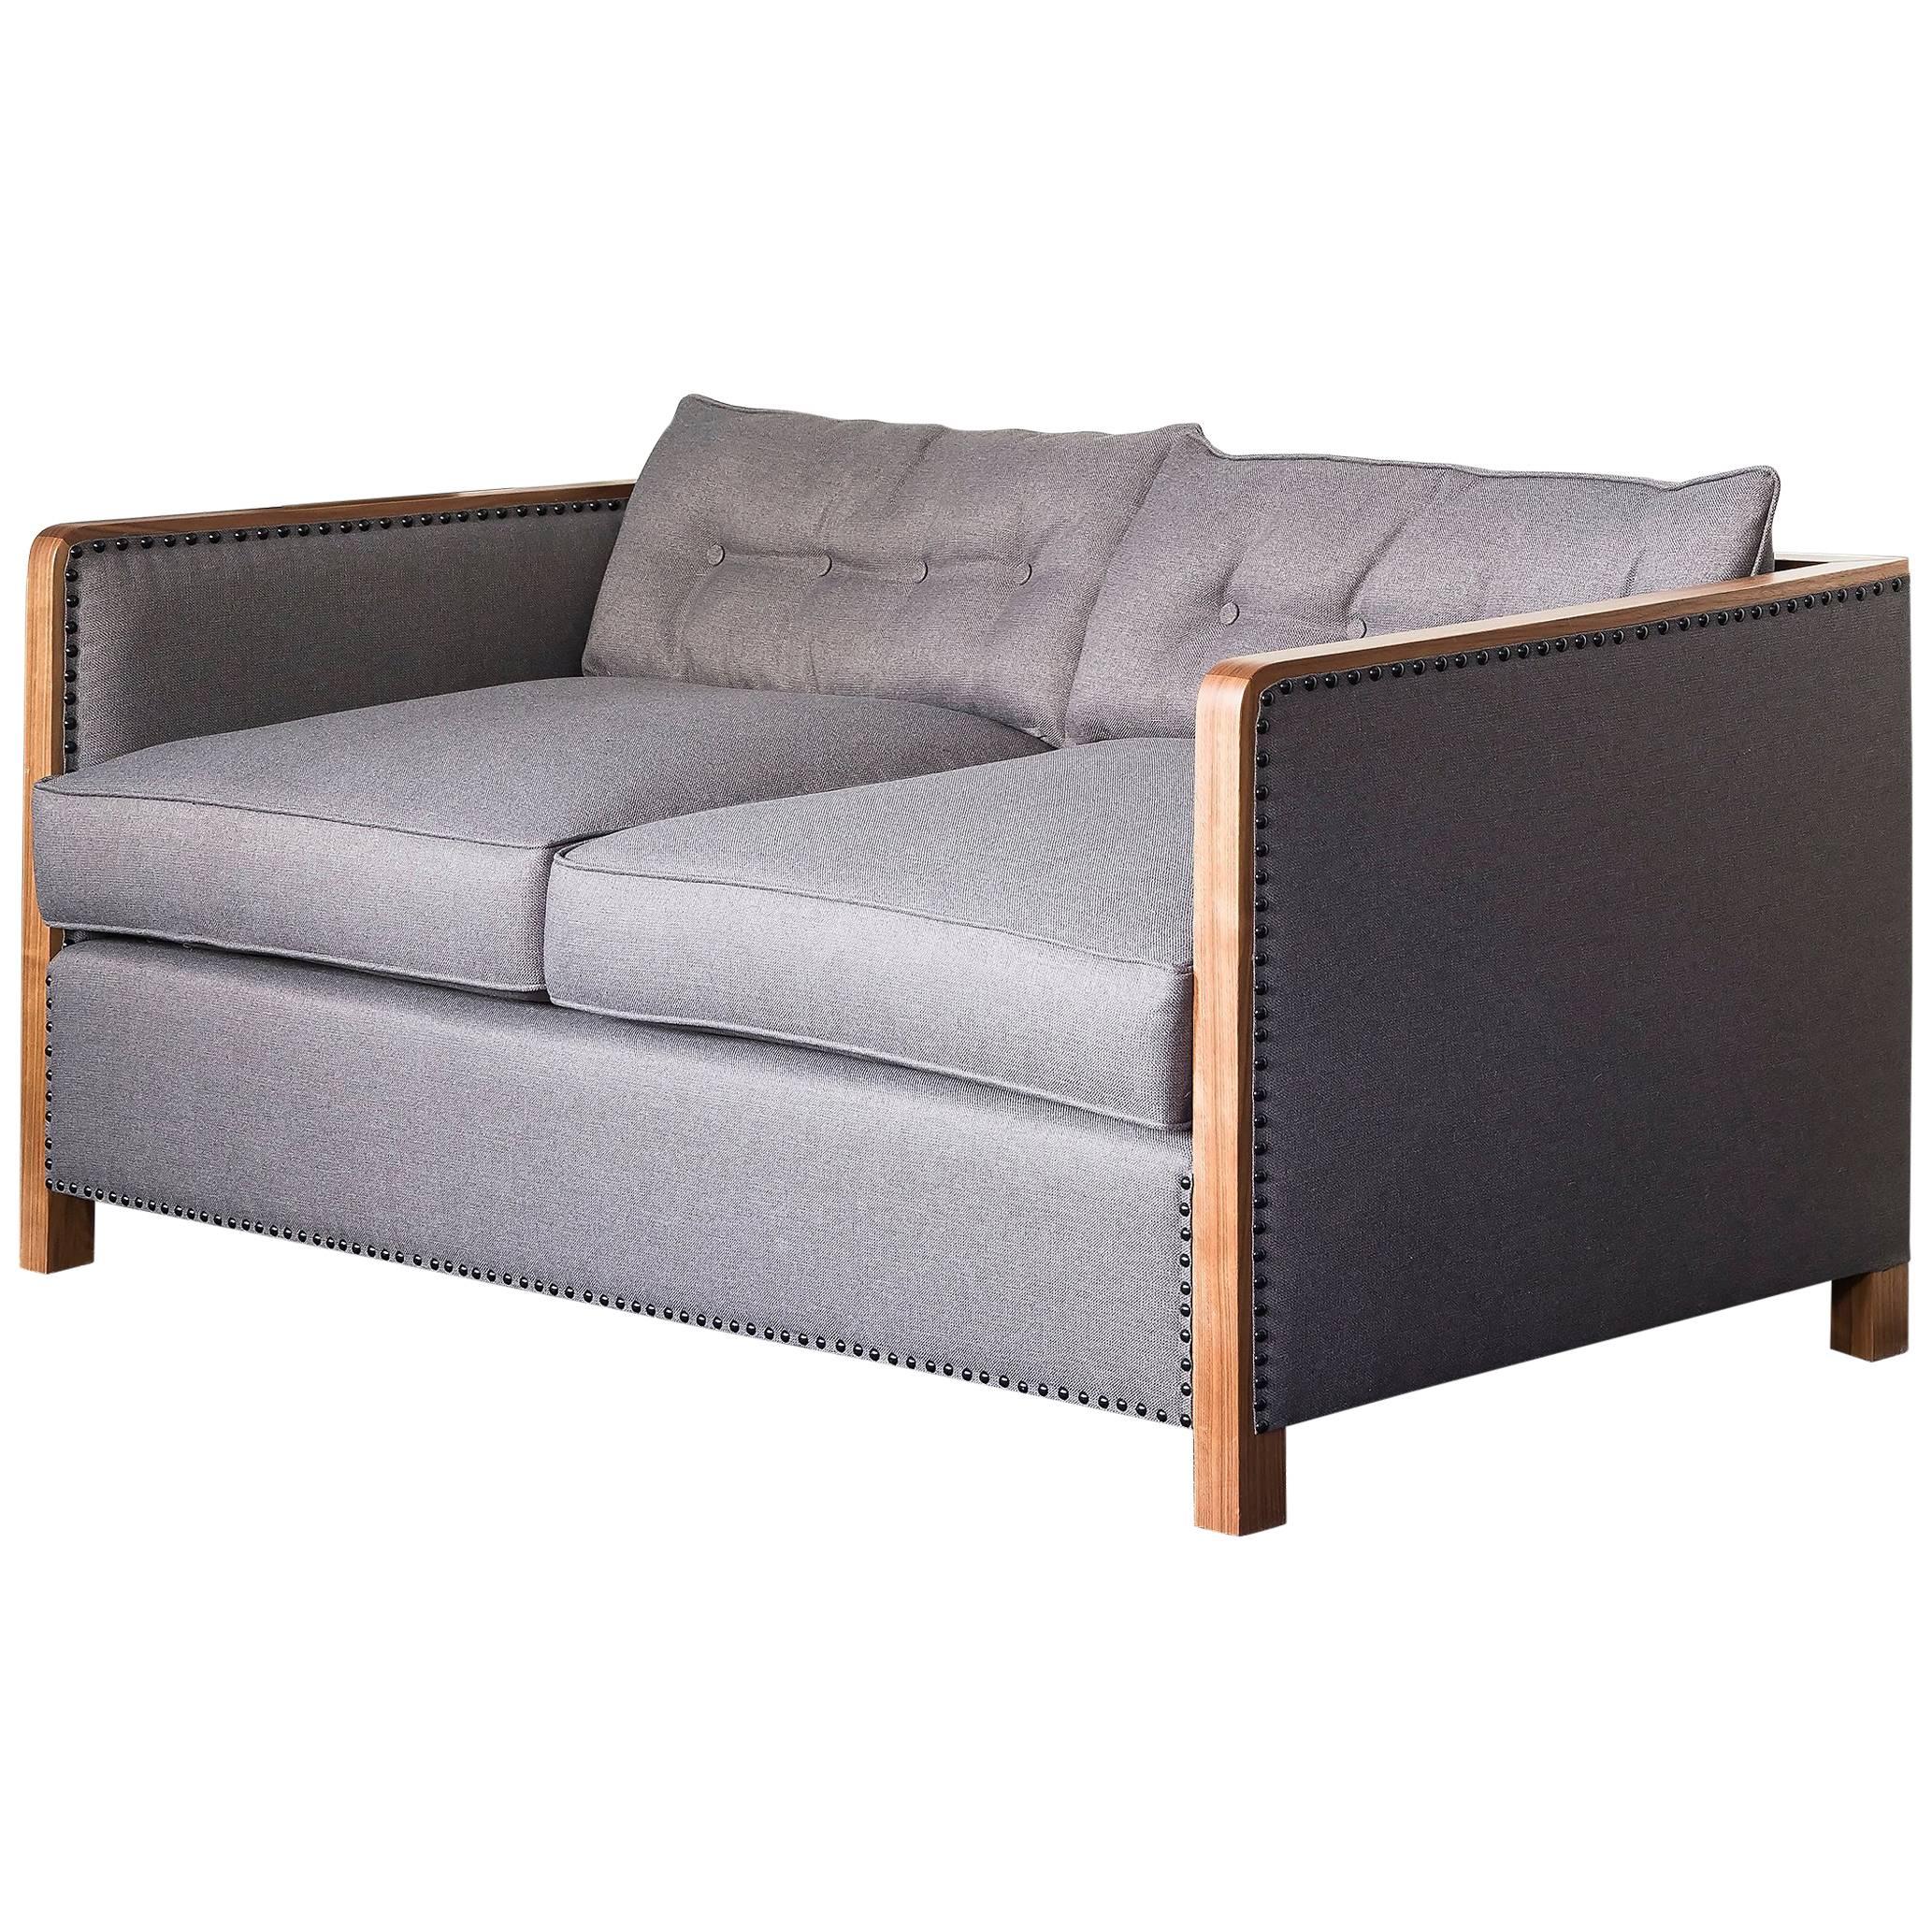 Art Deco Style Bacco Two-Seat Sofa in Natural Walnut, Linen and Gunmetal Studs